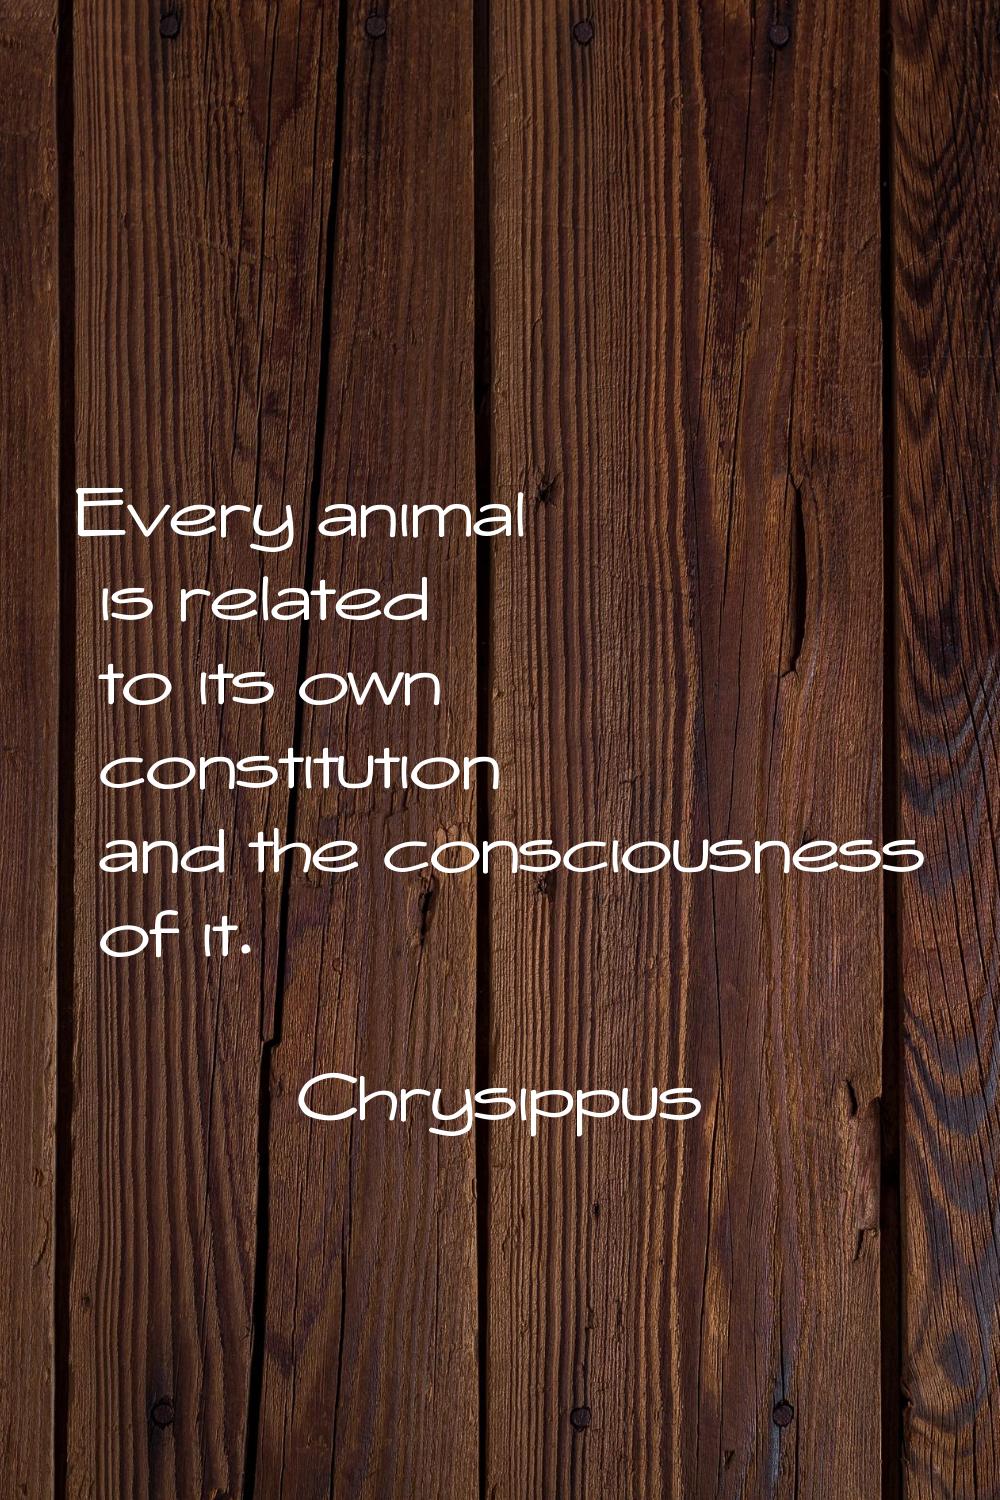 Every animal is related to its own constitution and the consciousness of it.